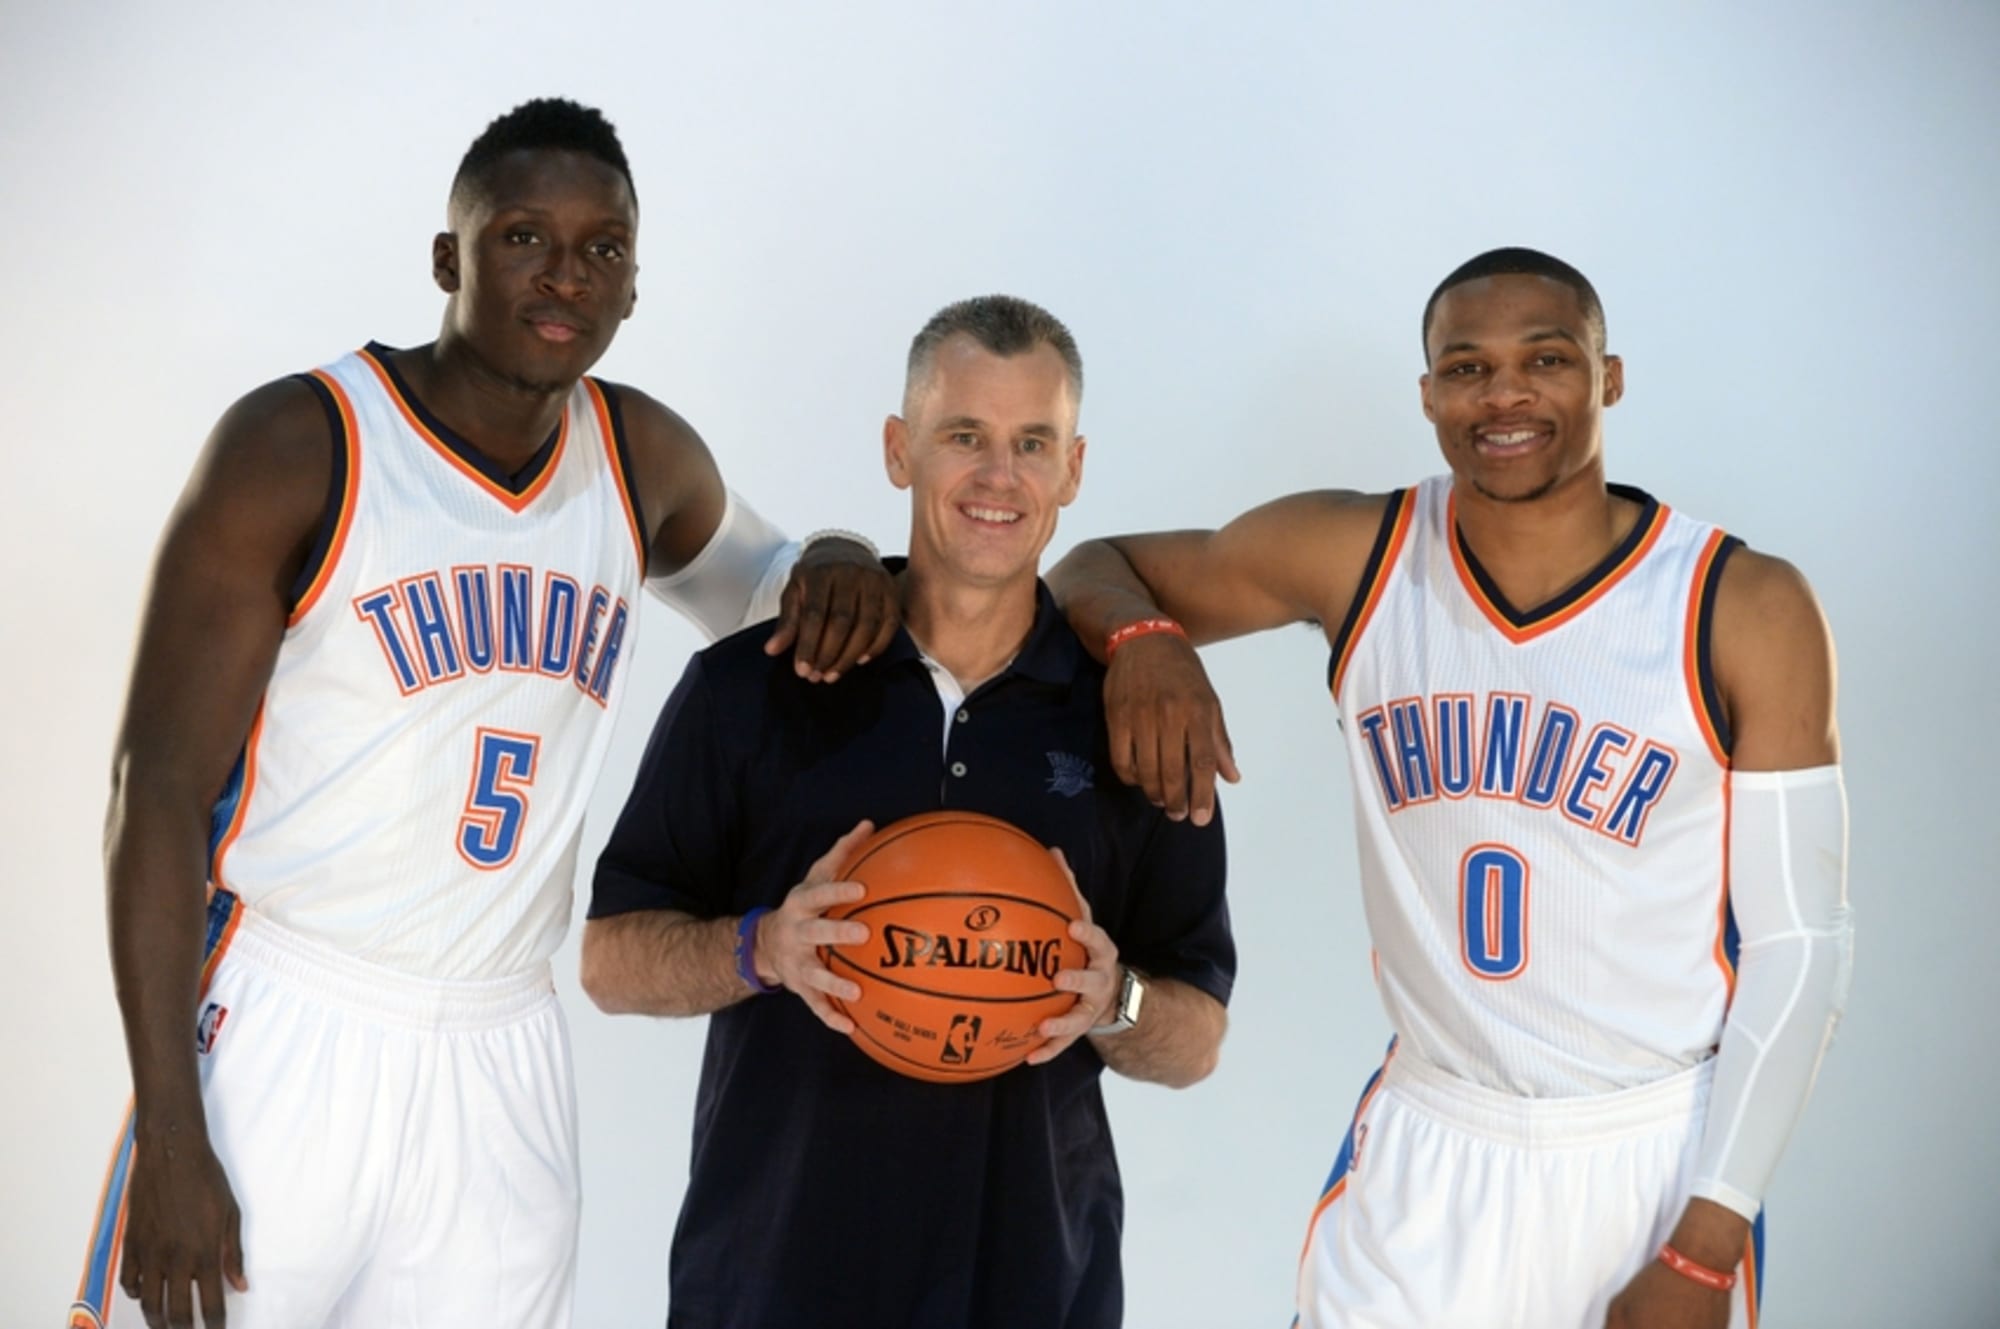 ON THIS DAY: Russell Westbrook plays last-ever game as member of